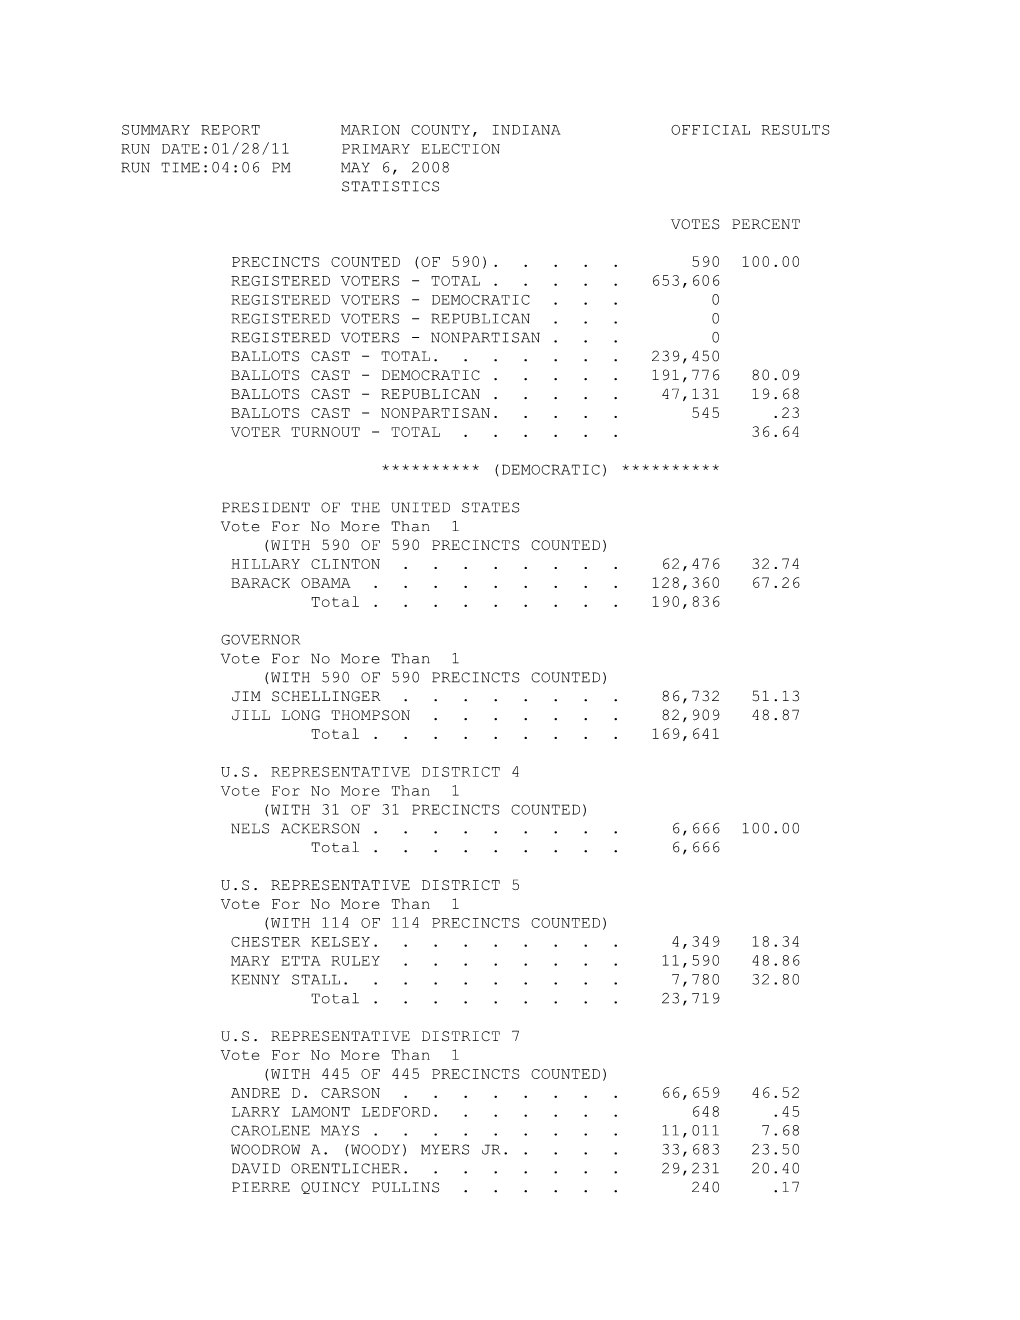 2008 Primary Election Results Summary